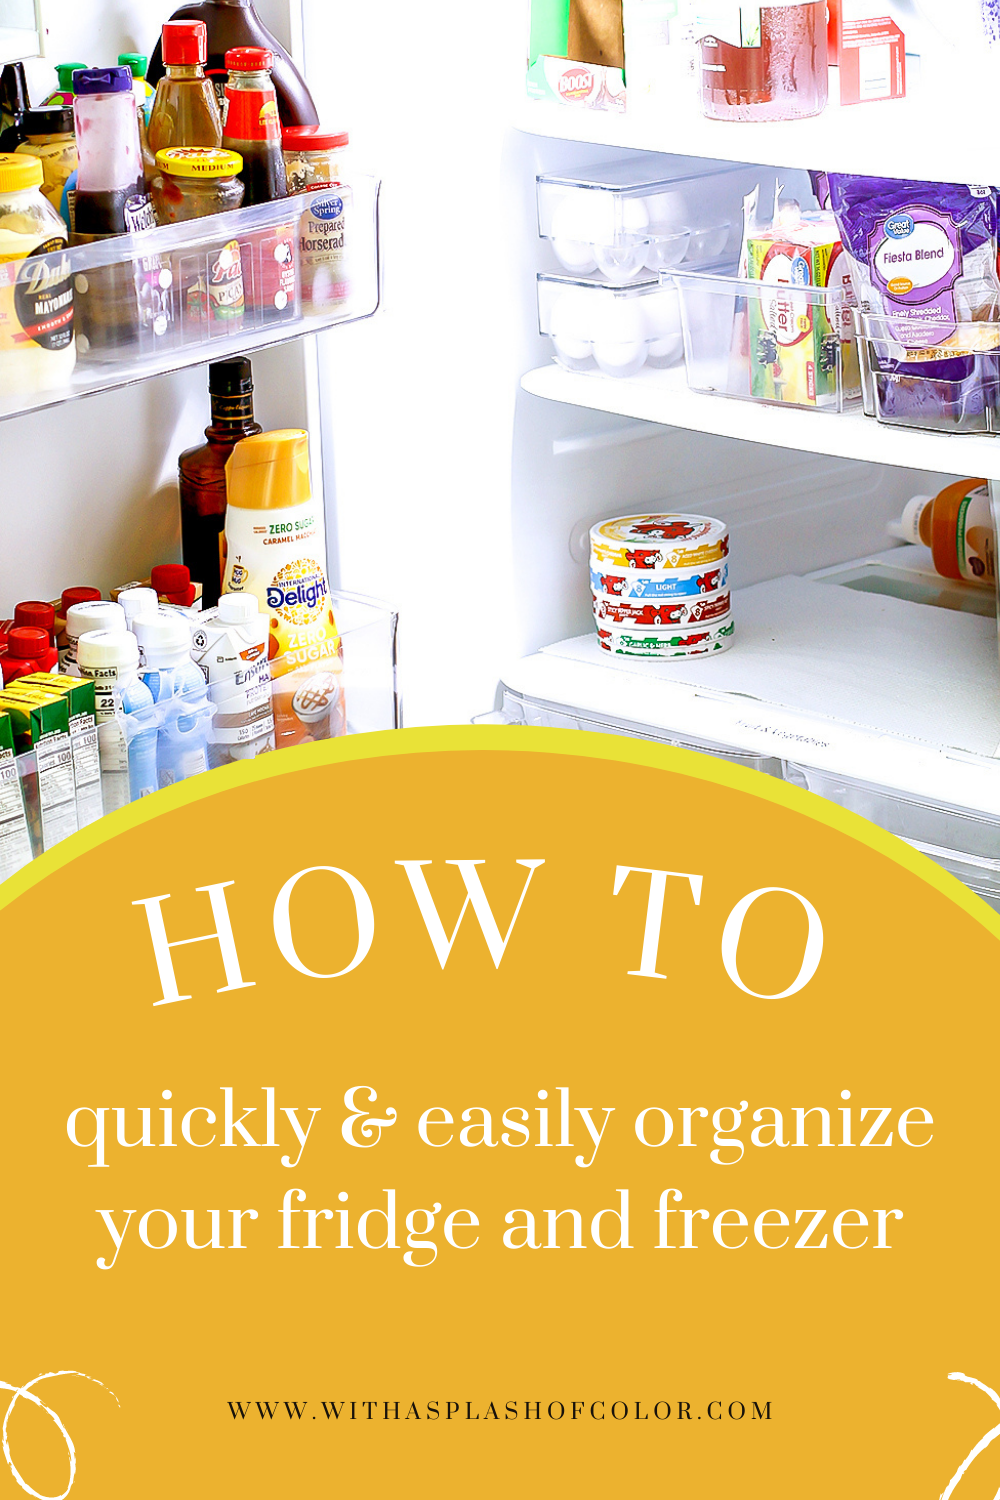 how to quickly & easily organize your fridge and freezer